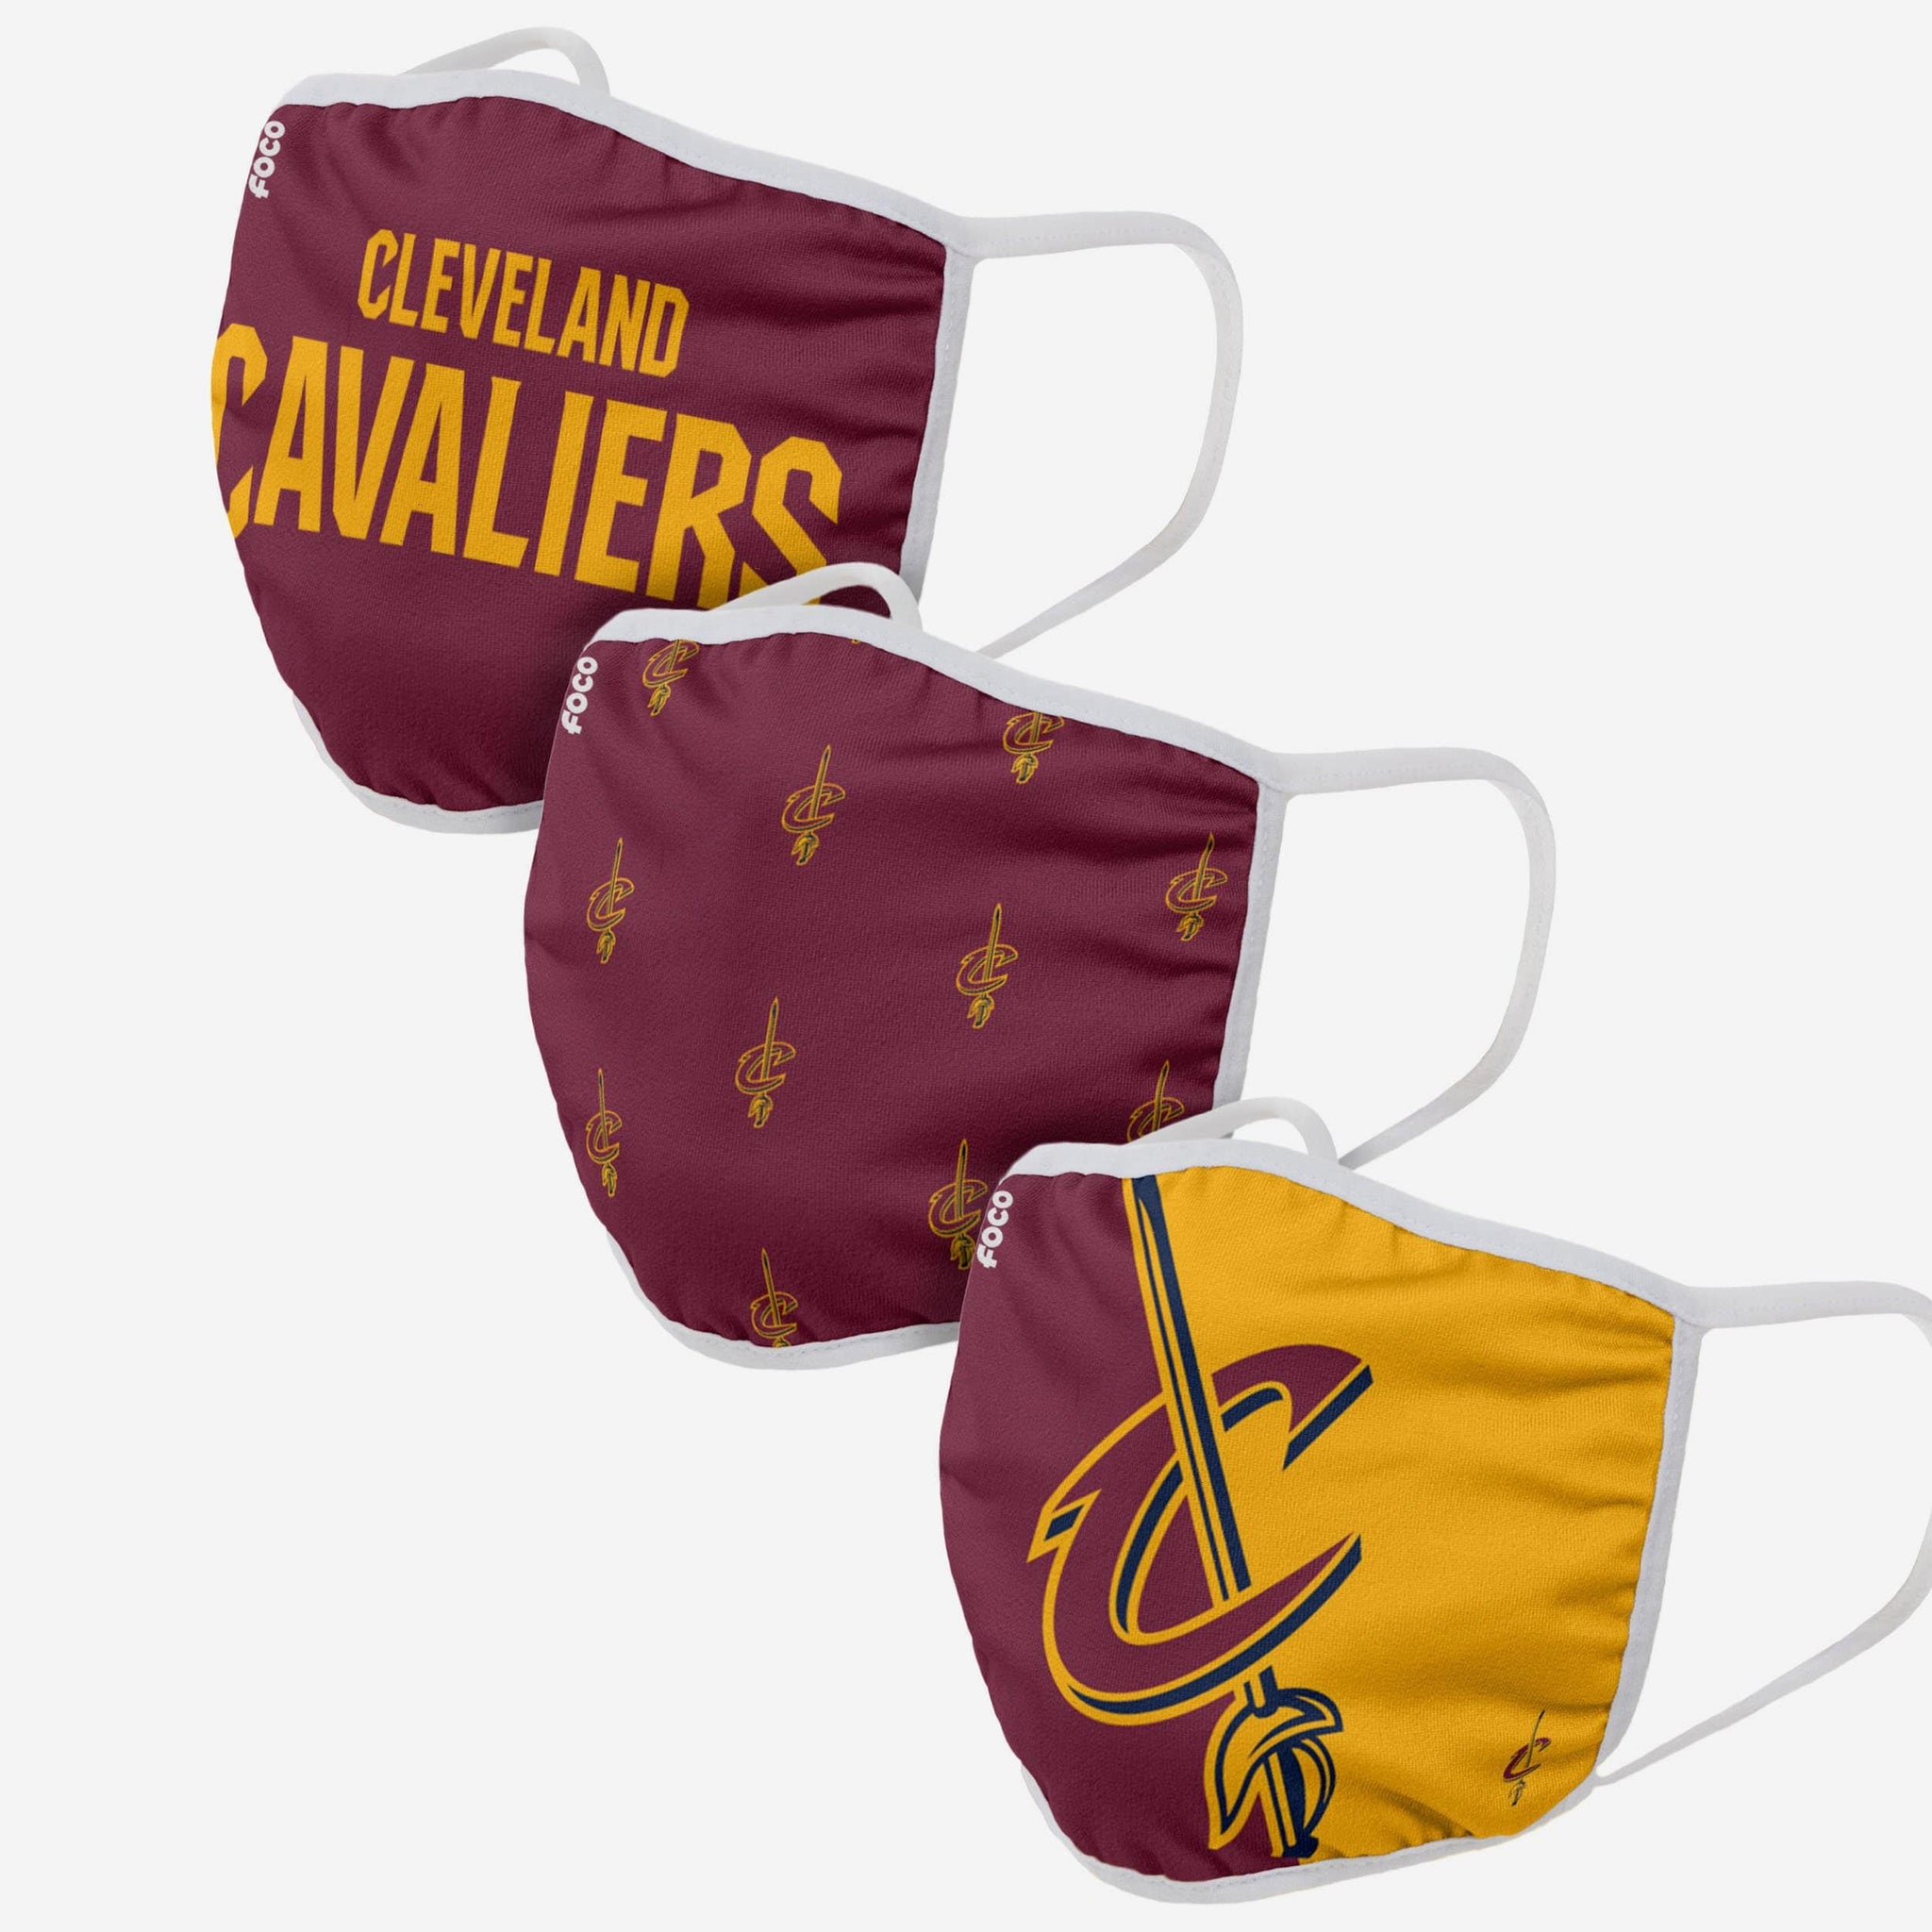 Cleveland Cavaliers Apparel, Collectibles, and Fan Gear. FOCO